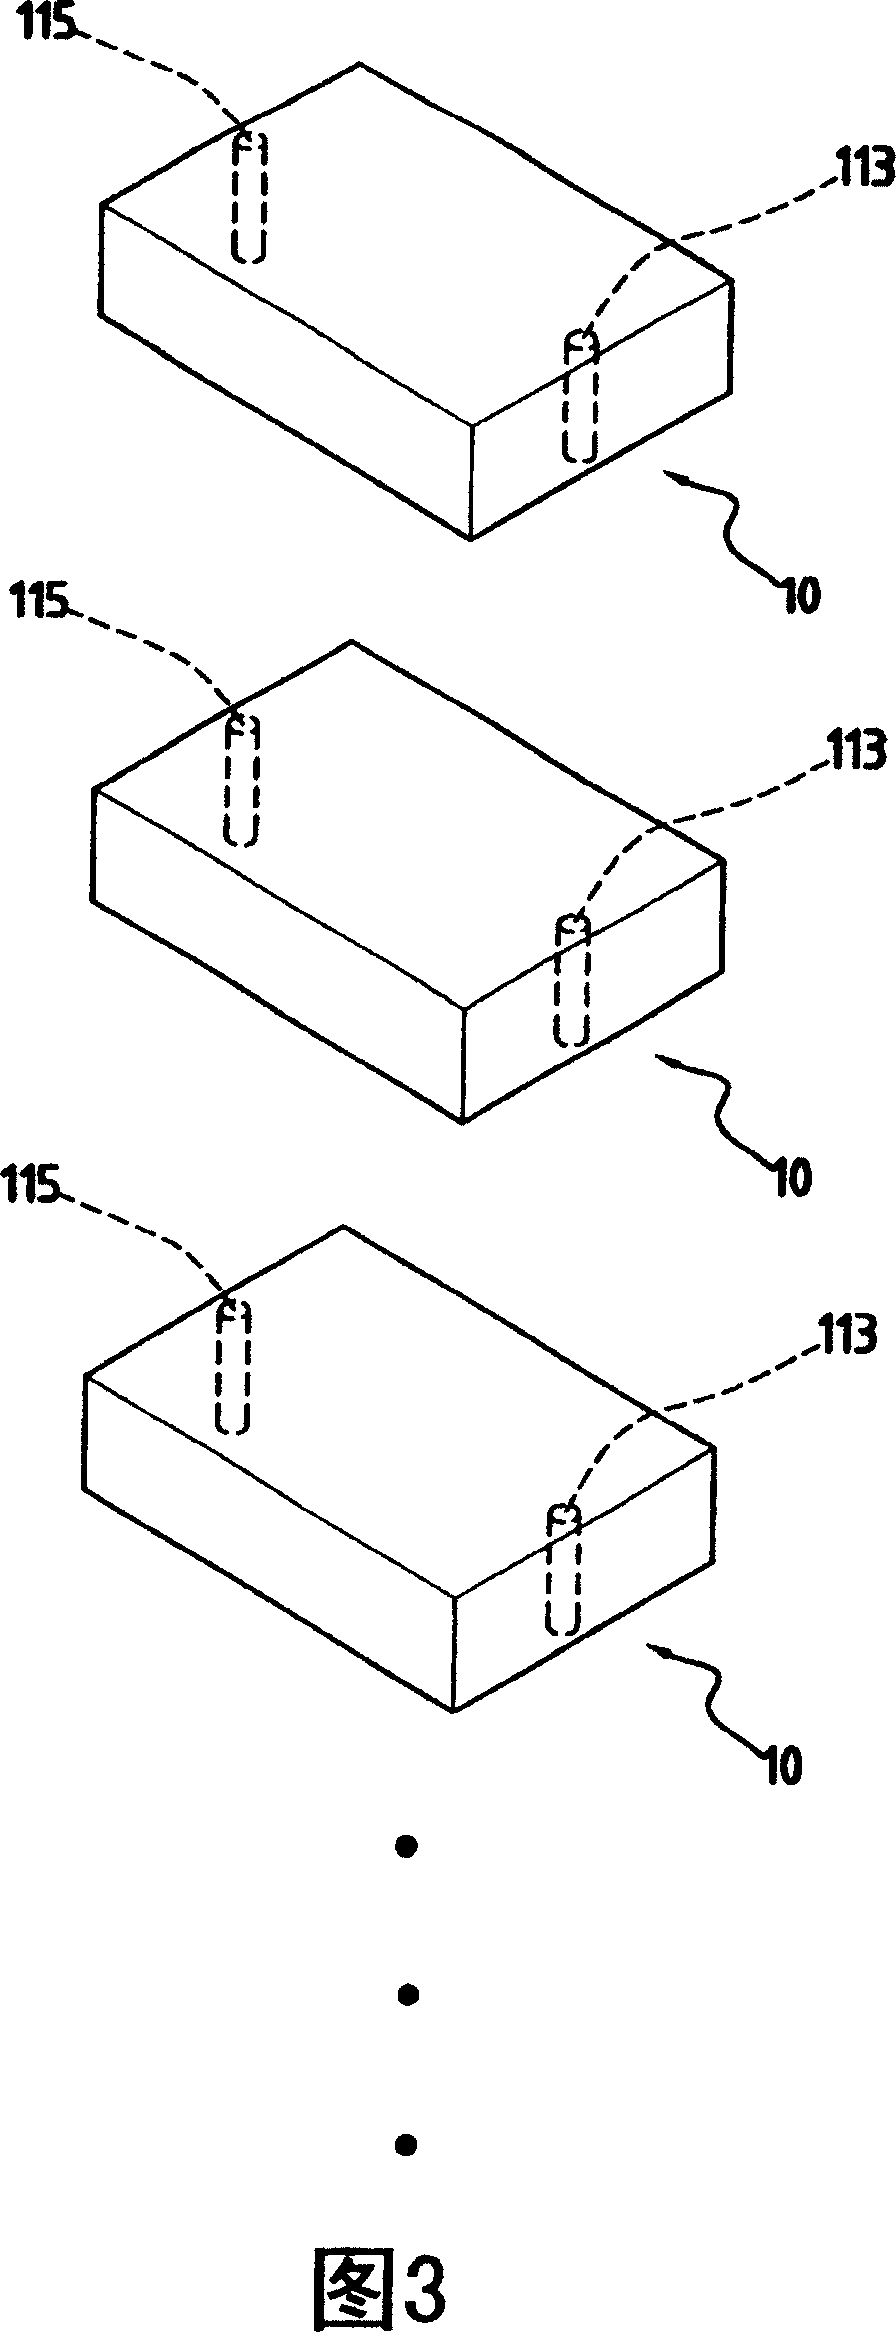 Secondary cell, array and multi-layer array secondary cell having same